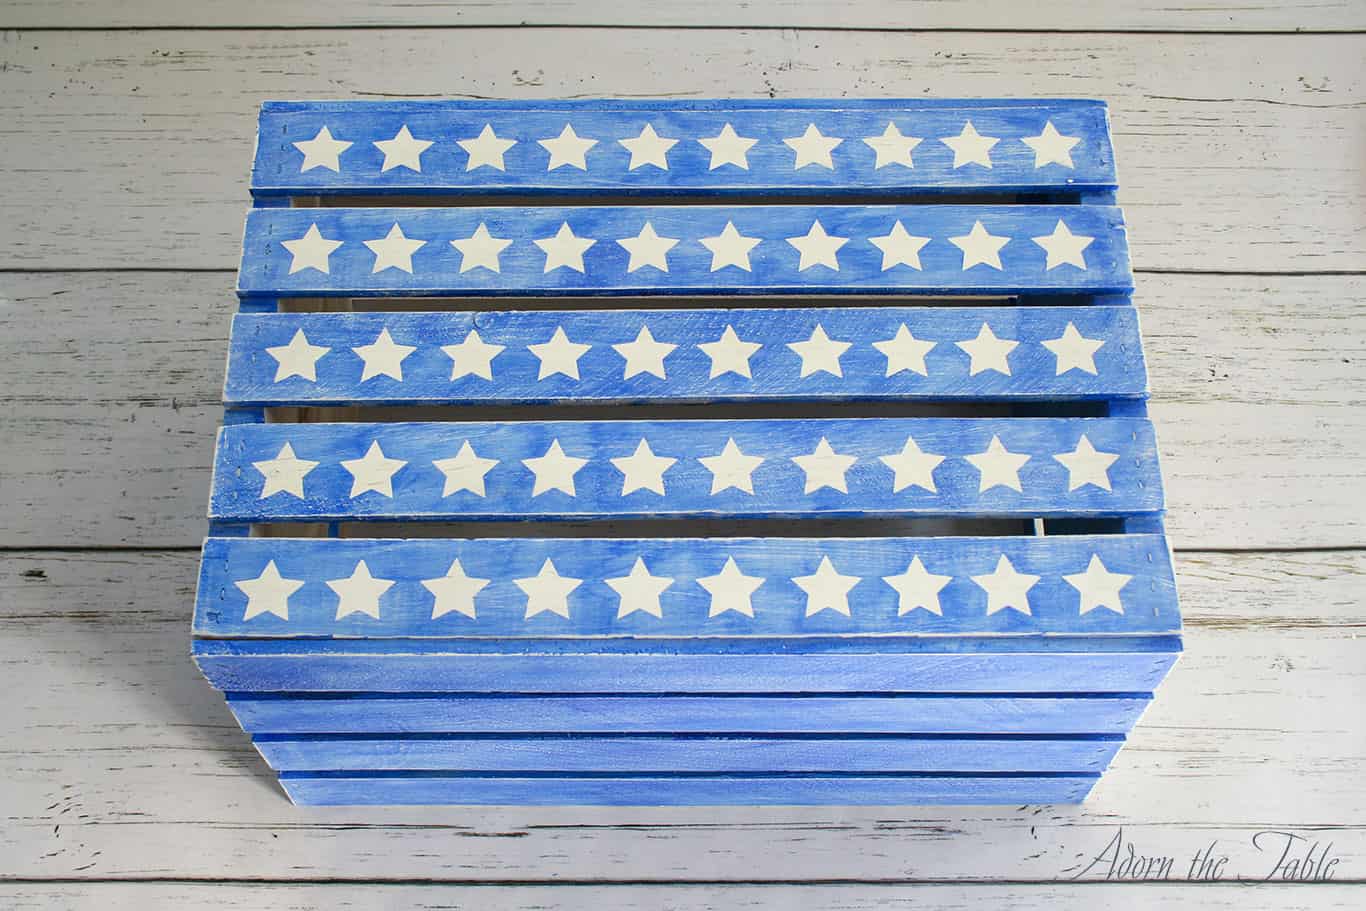 Painted craft crate to look weathered. Blue with white stars